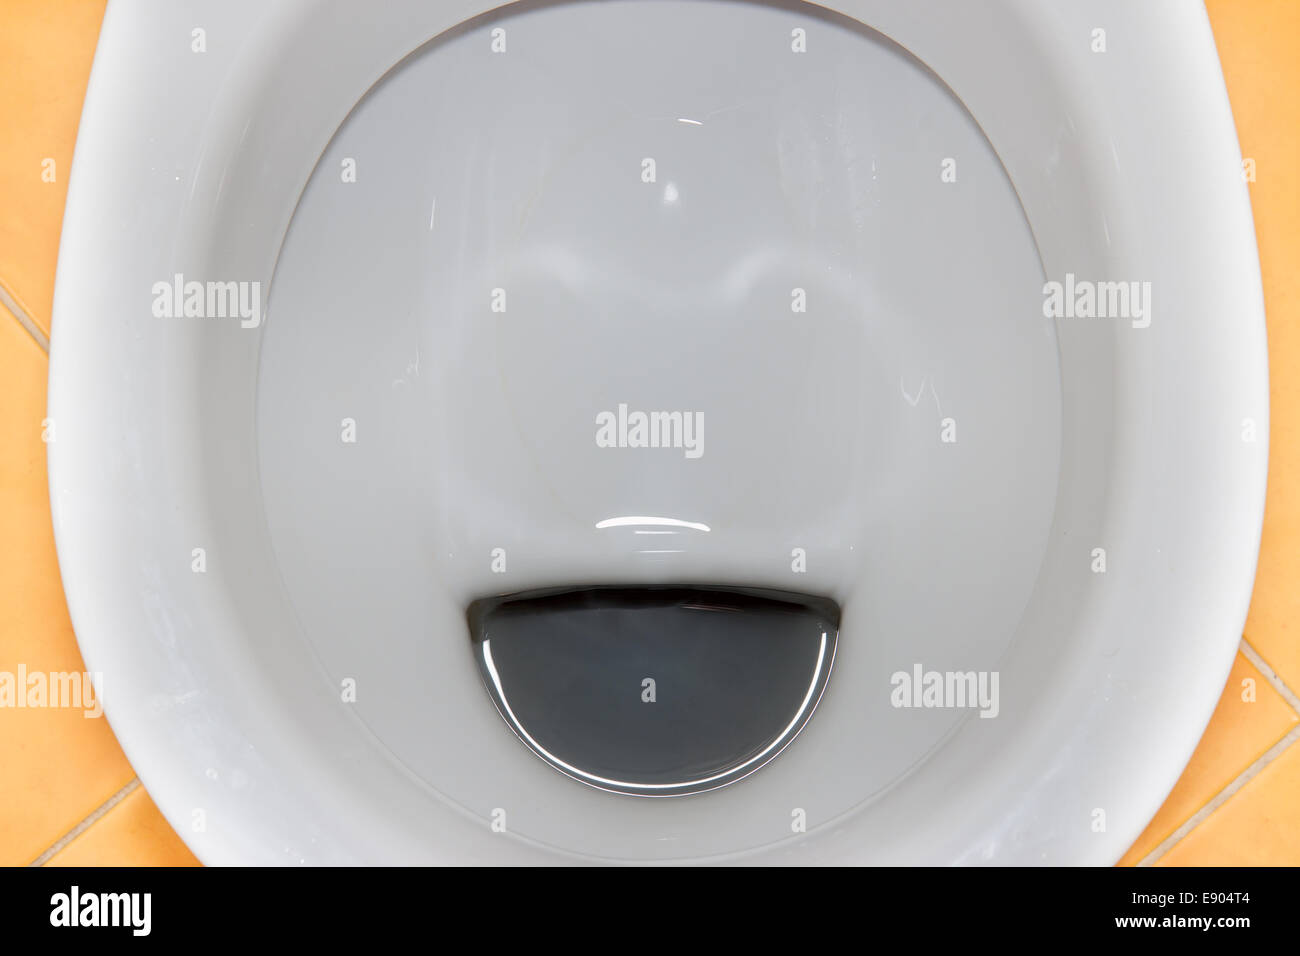 Top view of a flushing toilet Stock Photo